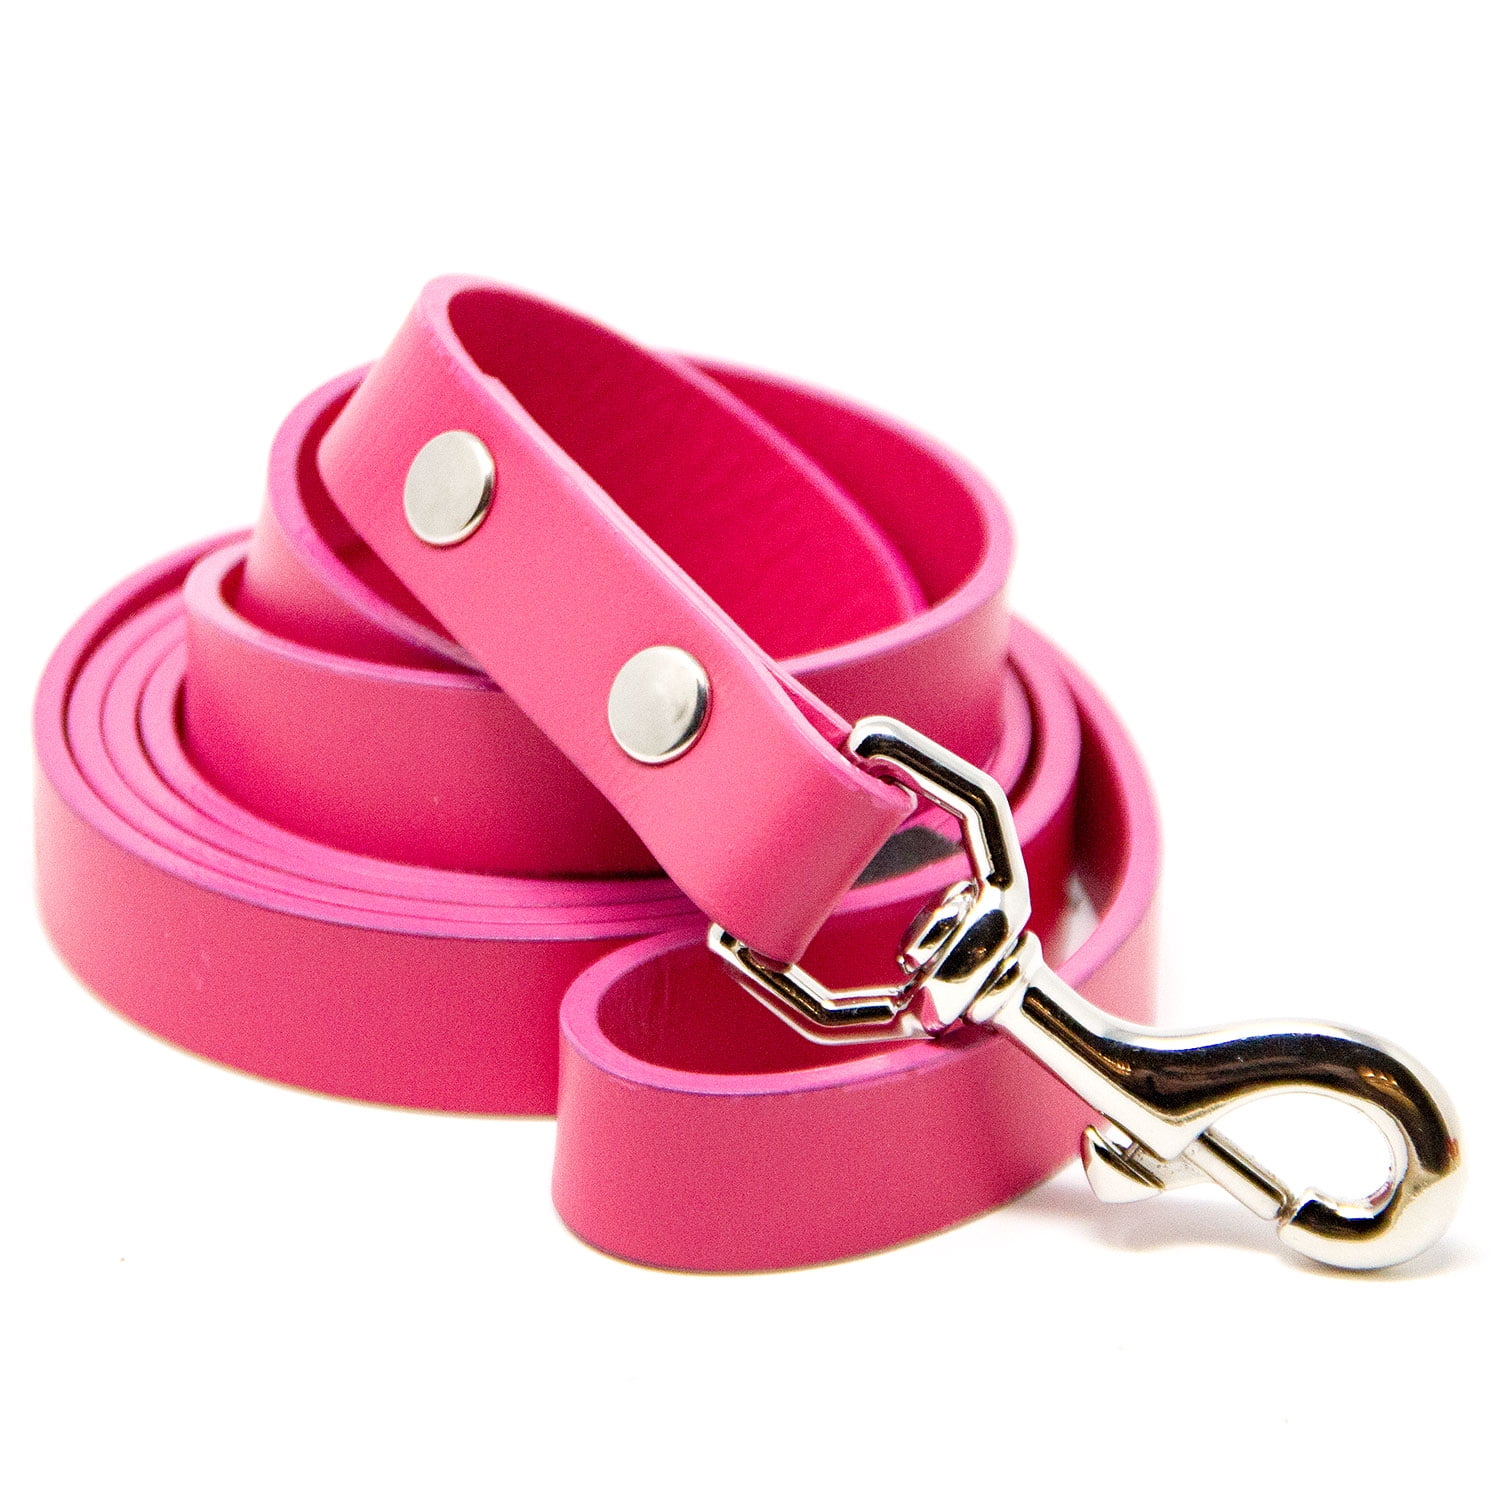 Logical Leather Dog Leash - 6 Foot Heavy Duty Full Grain Leather Lead; Best  for Training - Pink